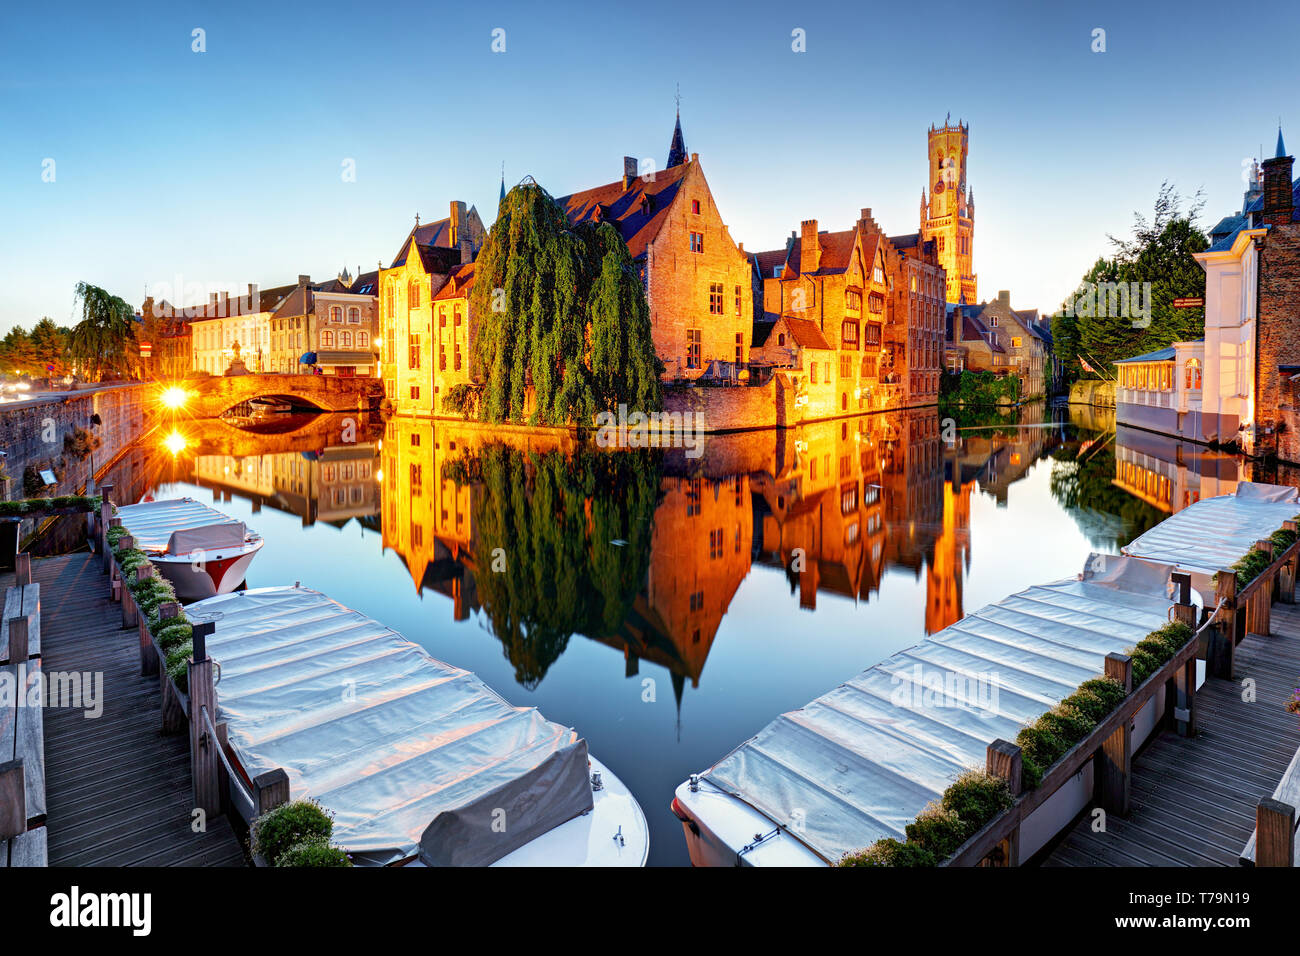 Bruges - Traditional city canals in the historical medieval. Belgium Stock Photo